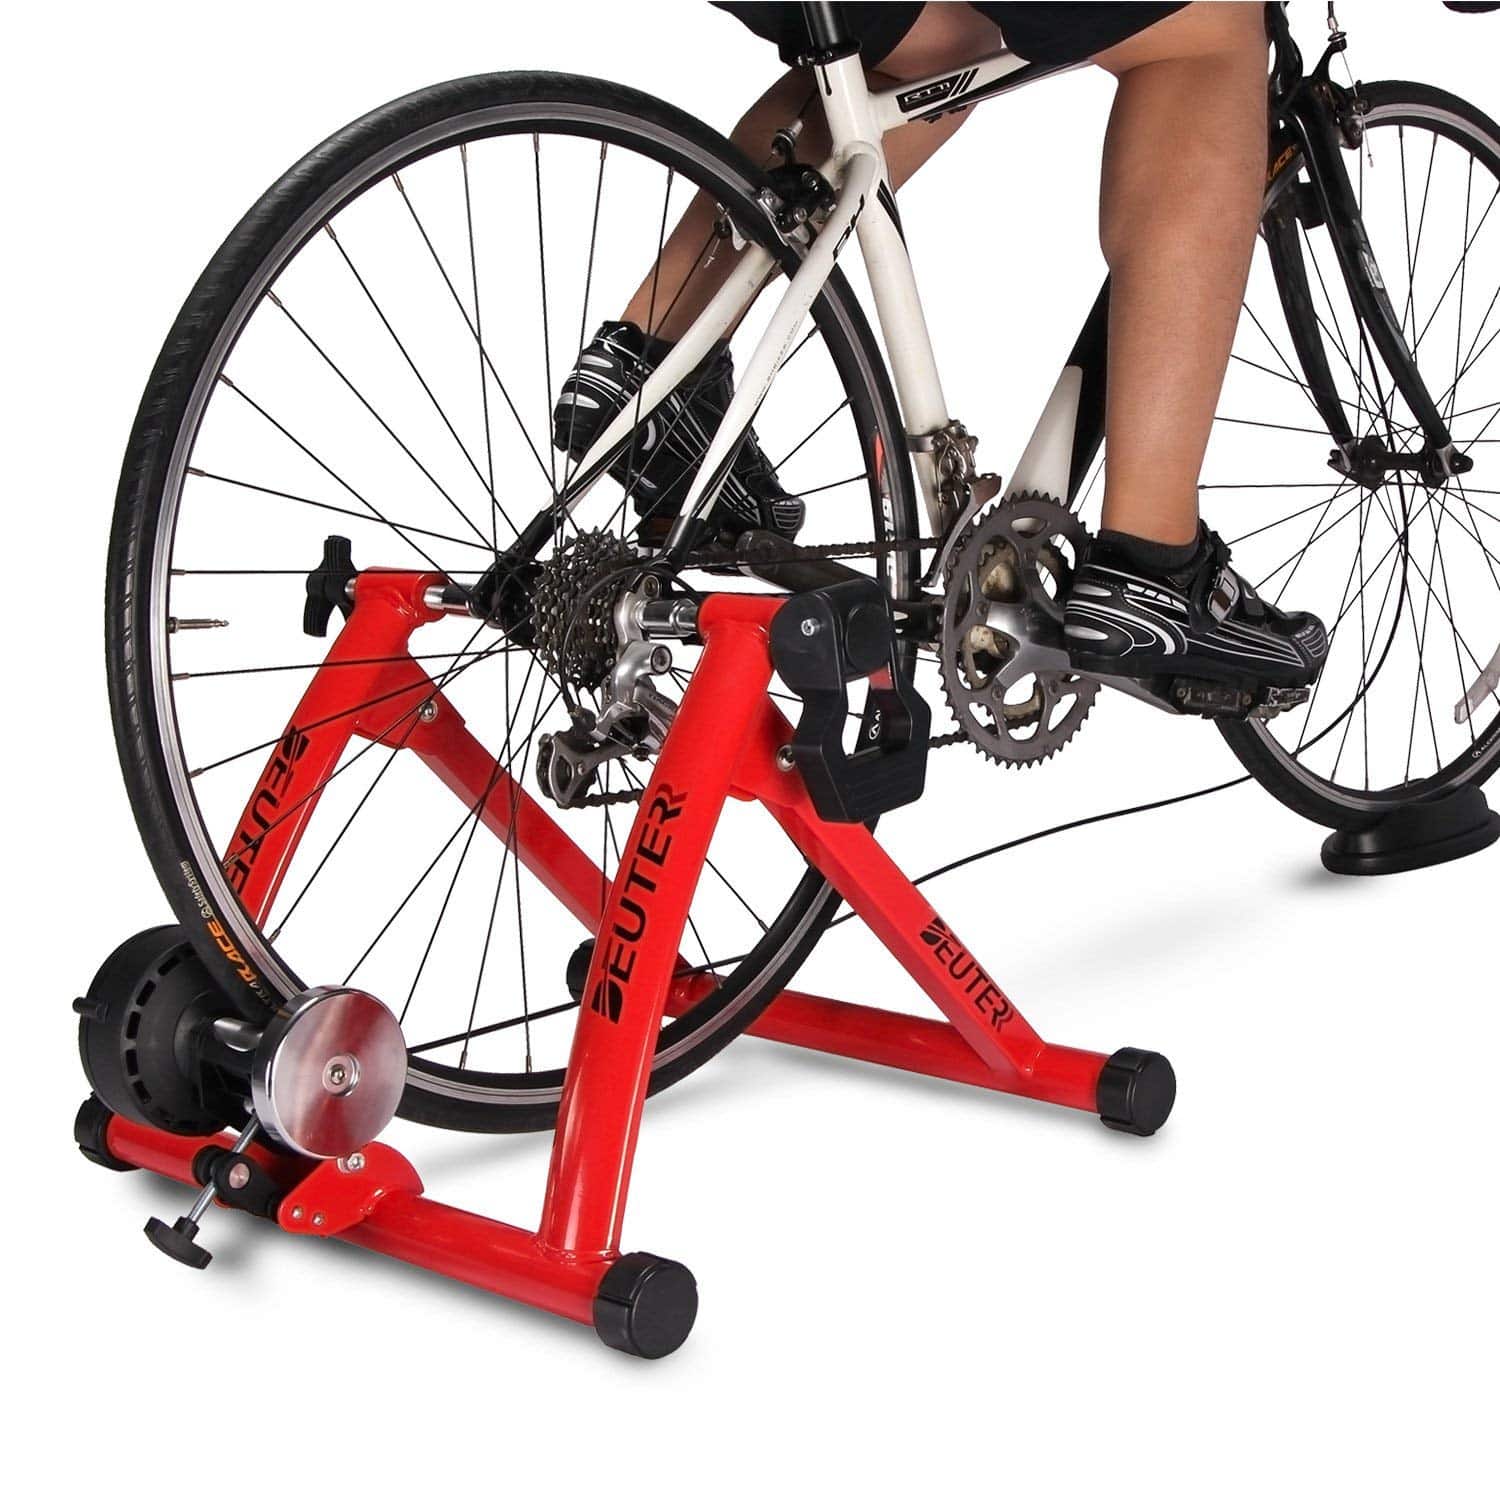 9. Deuter Bike Stand Trainer Stationary Magnetic Exercise Bicycle 